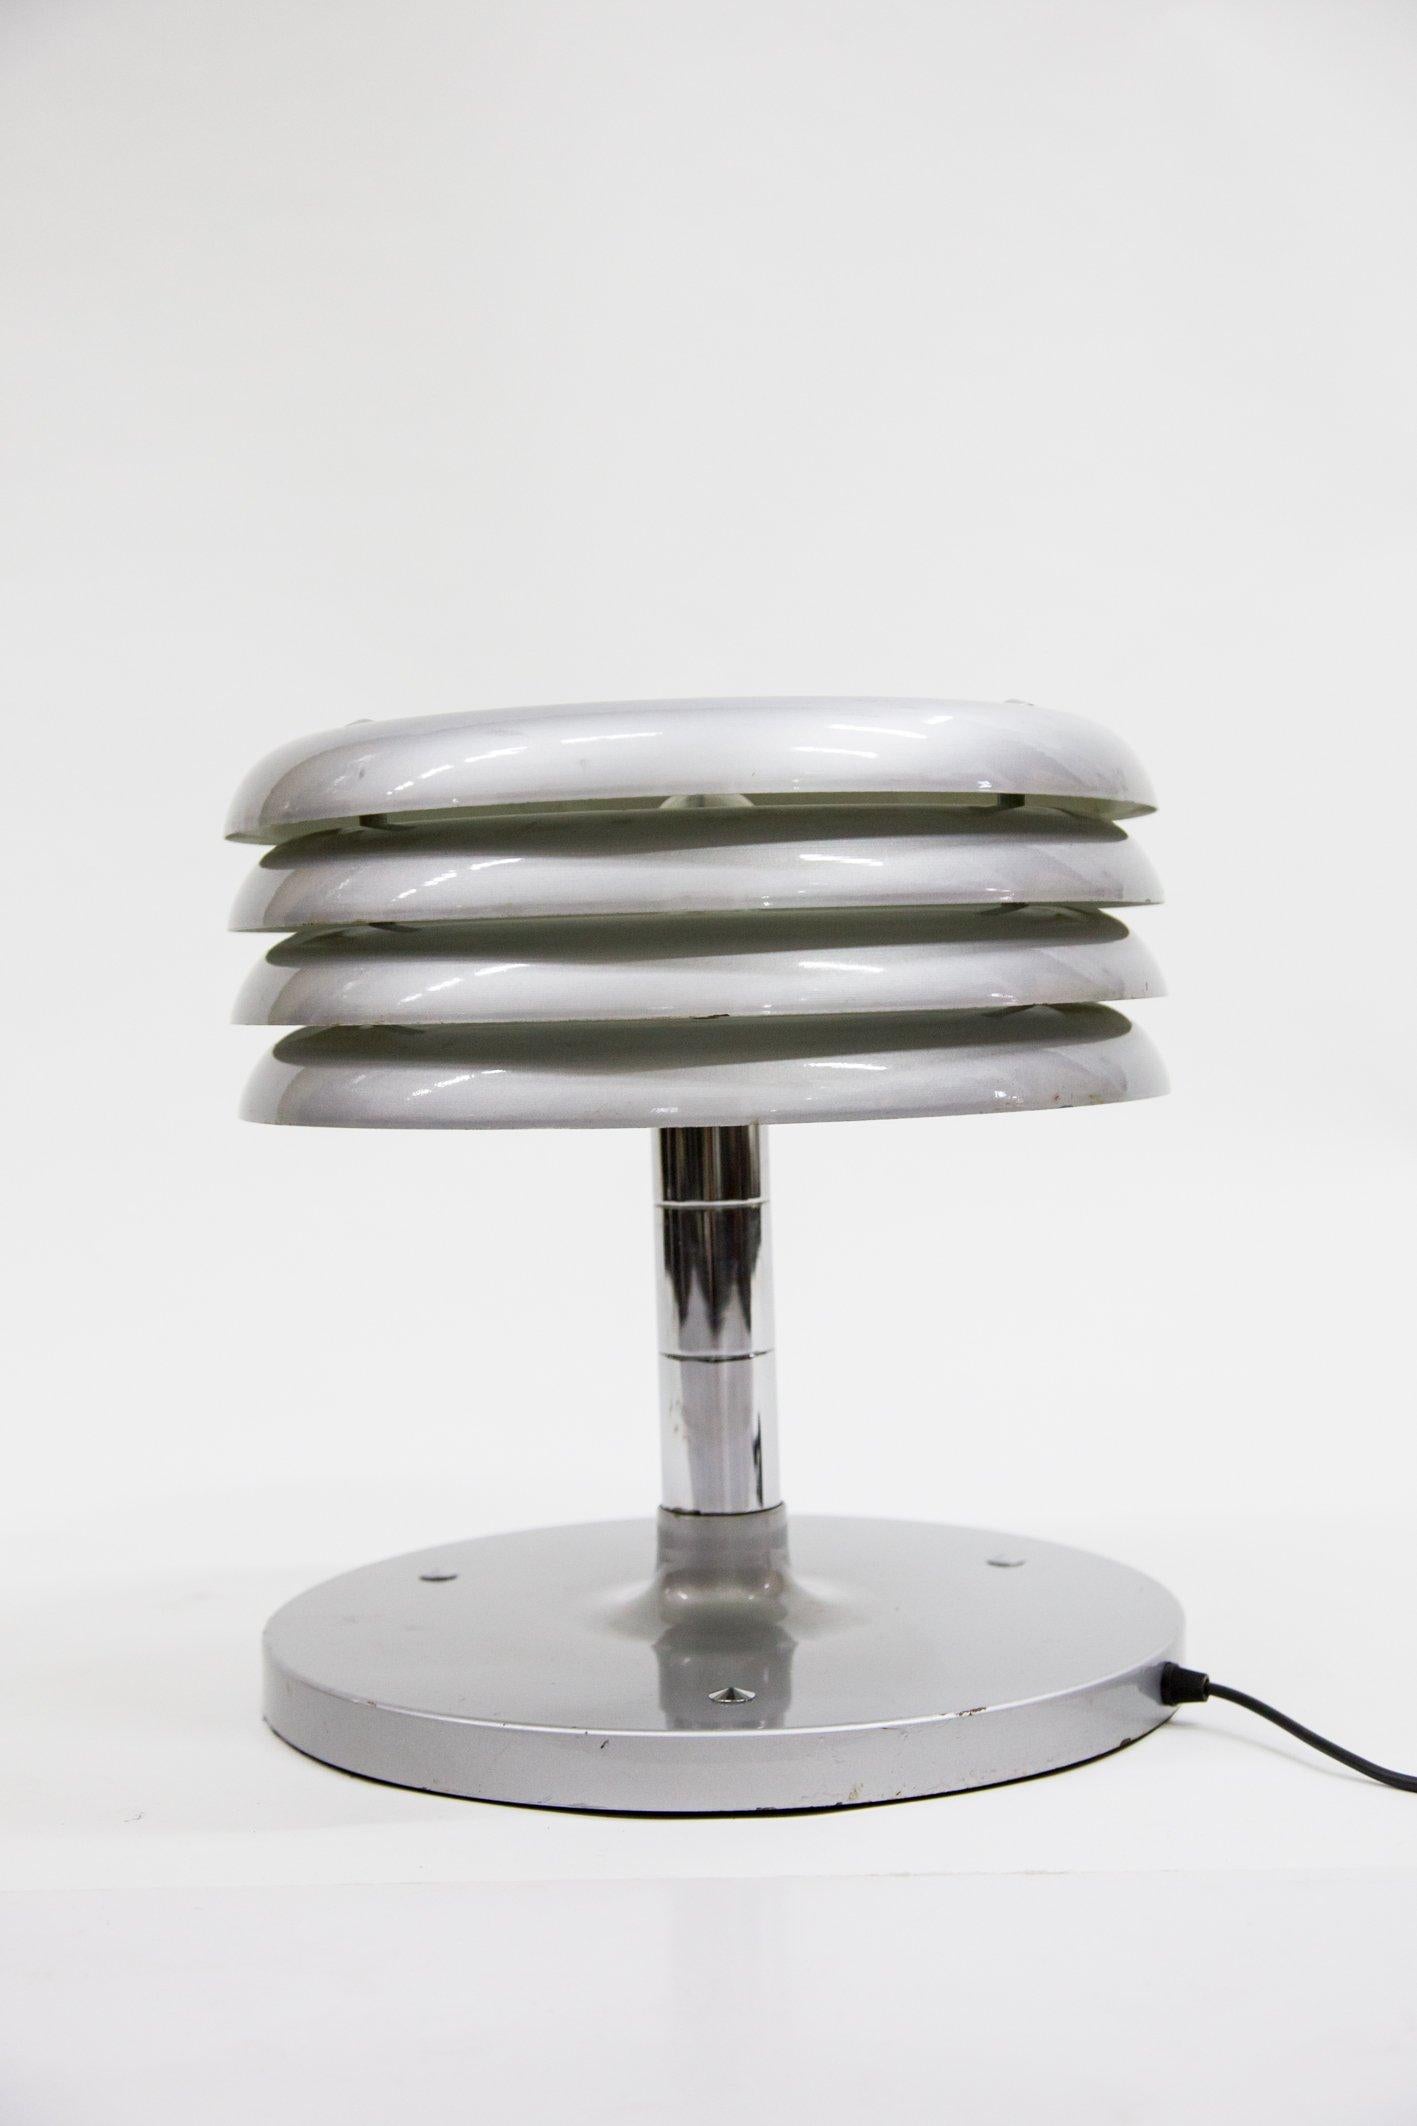 Designer piece by Tamas Borsfay, 1960s-1970s era. Manufactured in Hungary, these table lamps are getting more and more rare.
Painted and lacquered silver, with some slight scratching and damage on the paint. Electronically restored.

This piece has